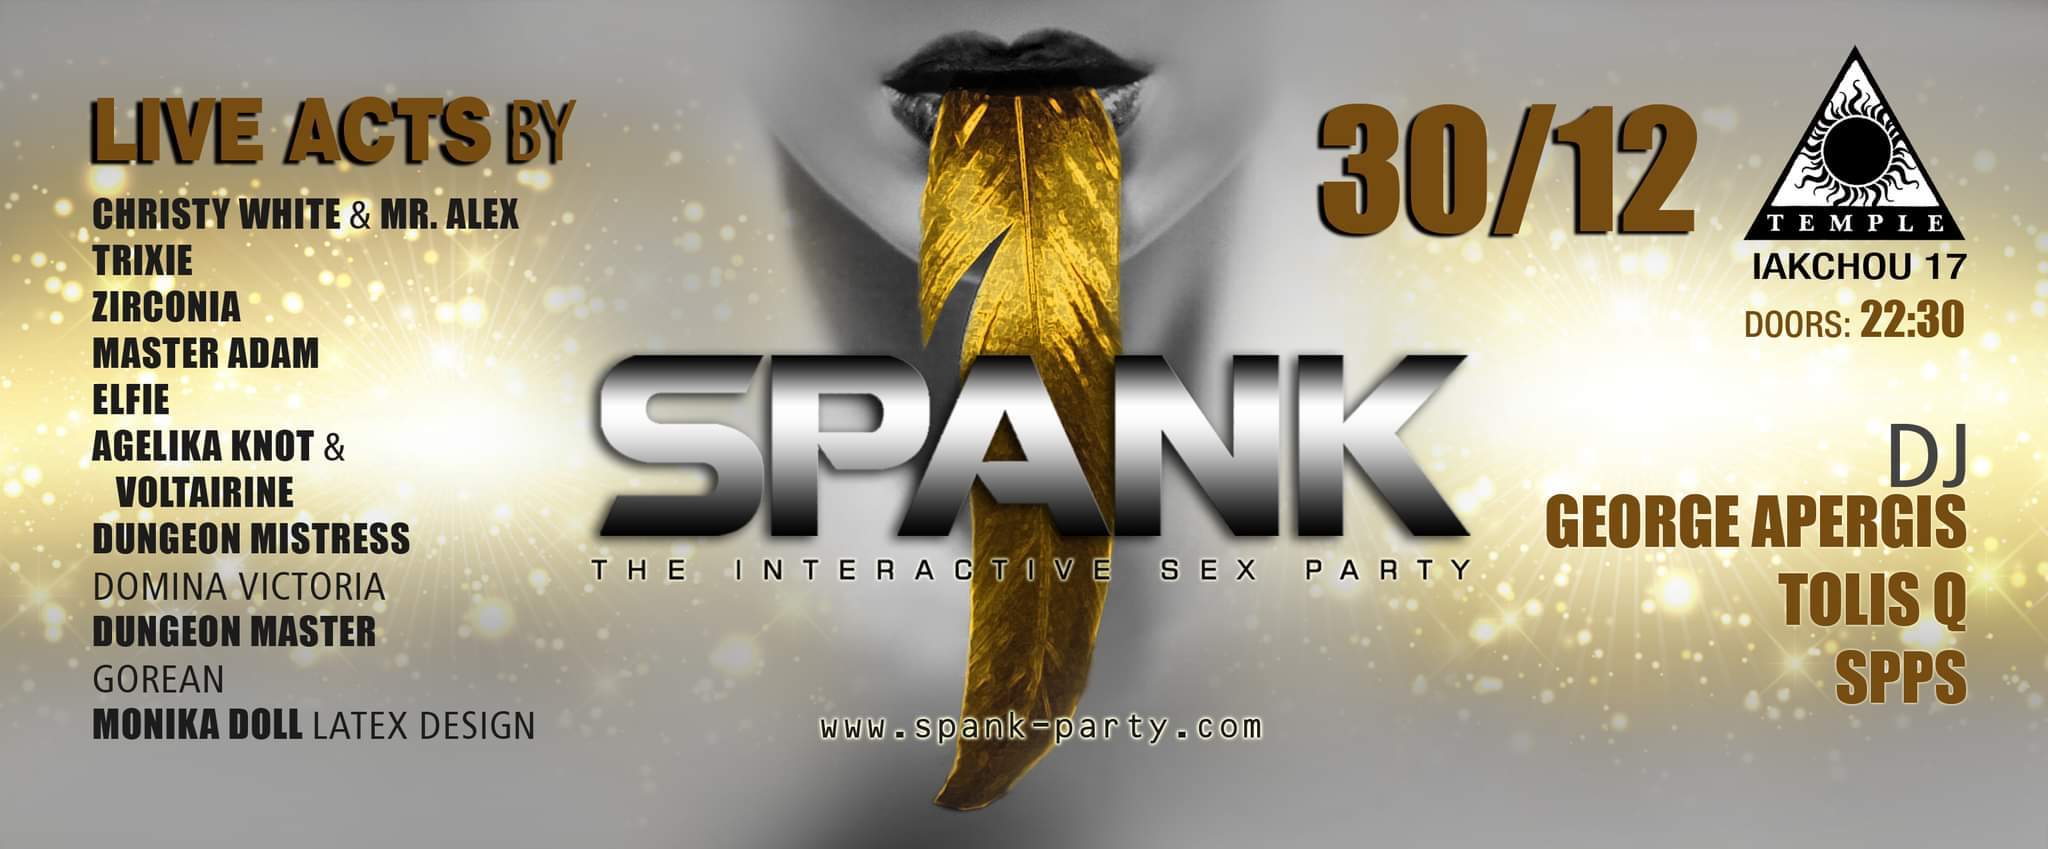 SPANK the interactive play party - フライヤー表